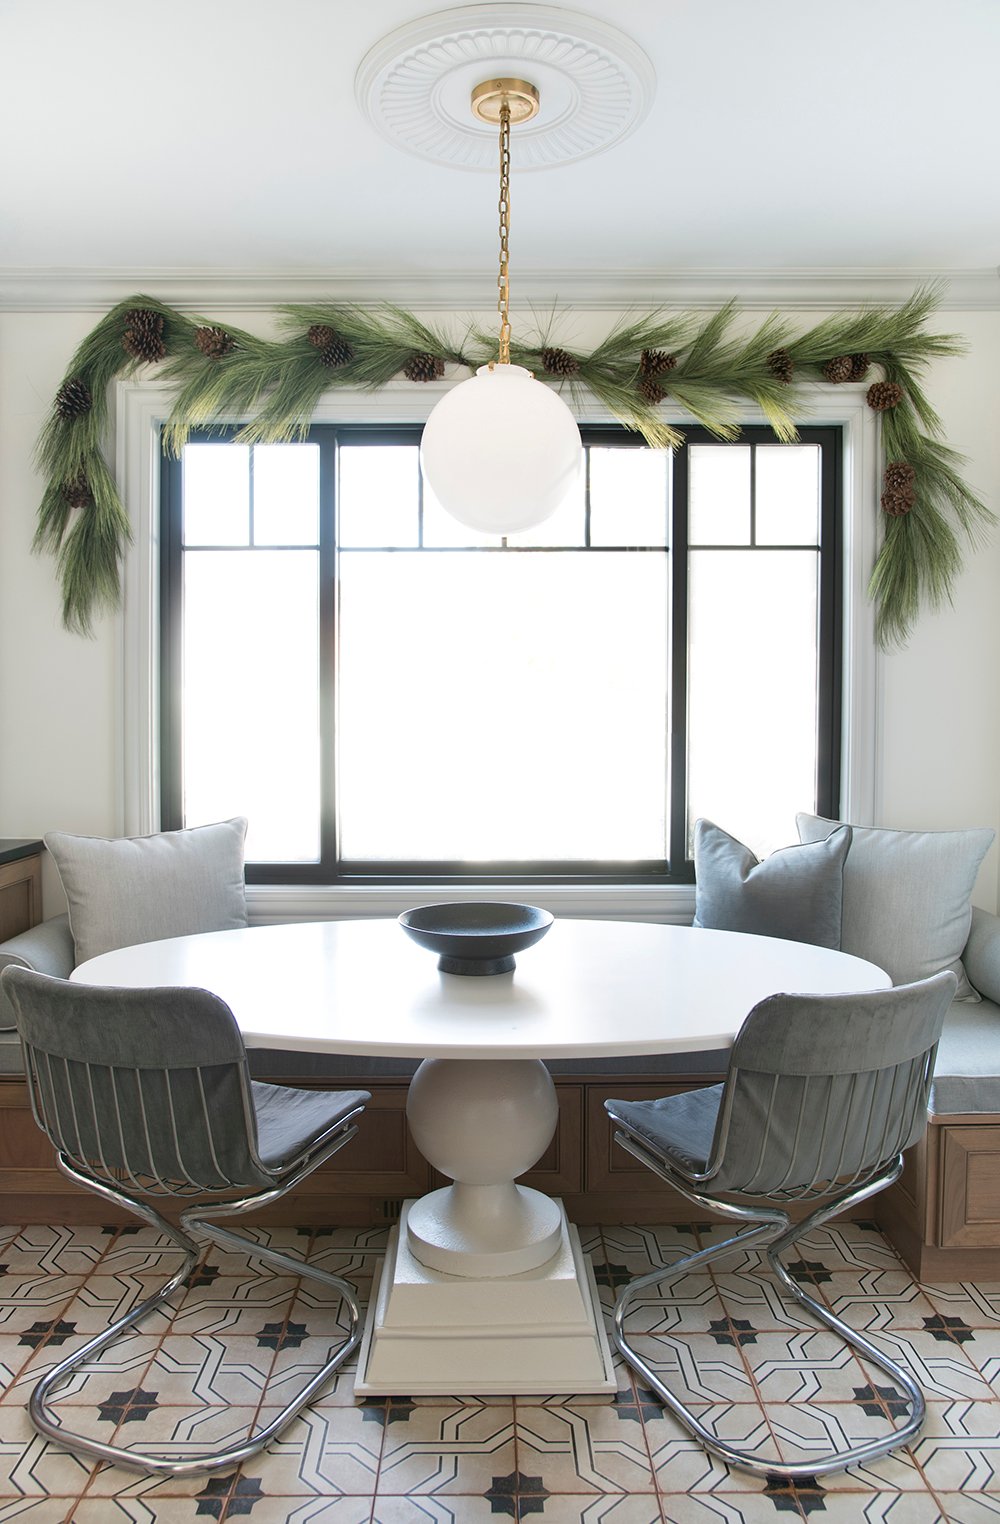 Decorating for the Holidays Without a Tree - roomfortuesday.com